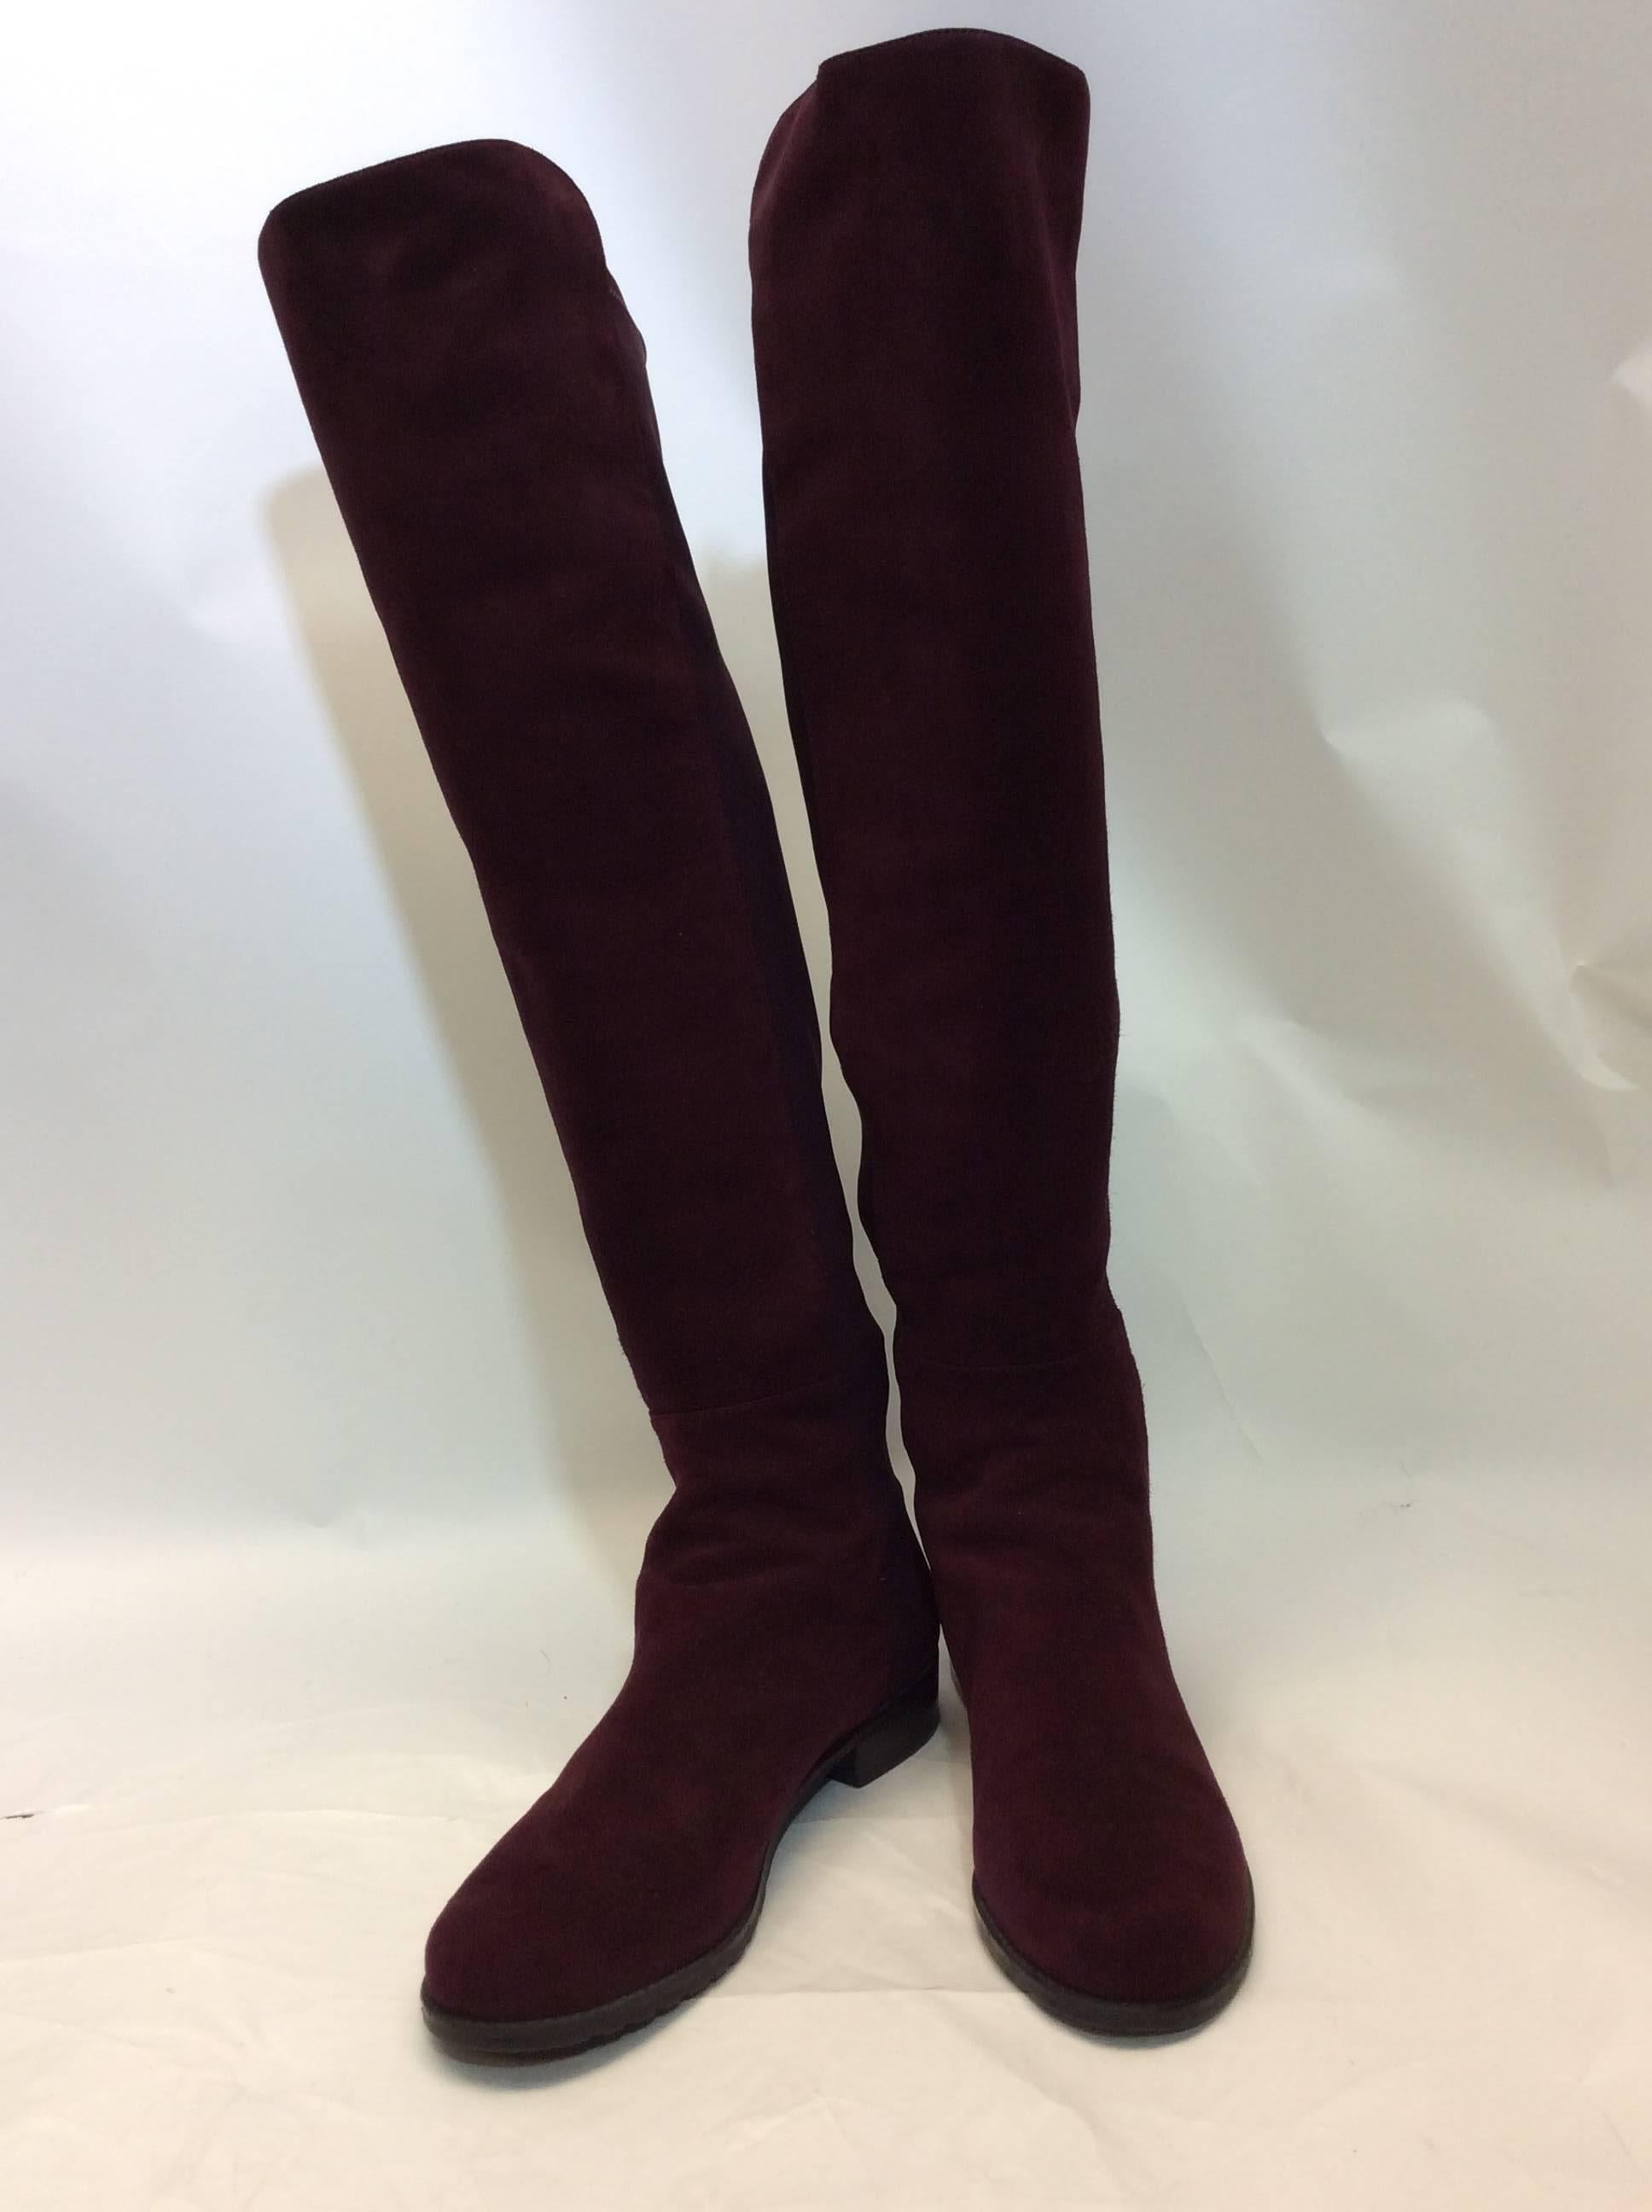 Stuart Weitzman Oxblood Suede Over The Knee Boots In New Condition For Sale In Narberth, PA